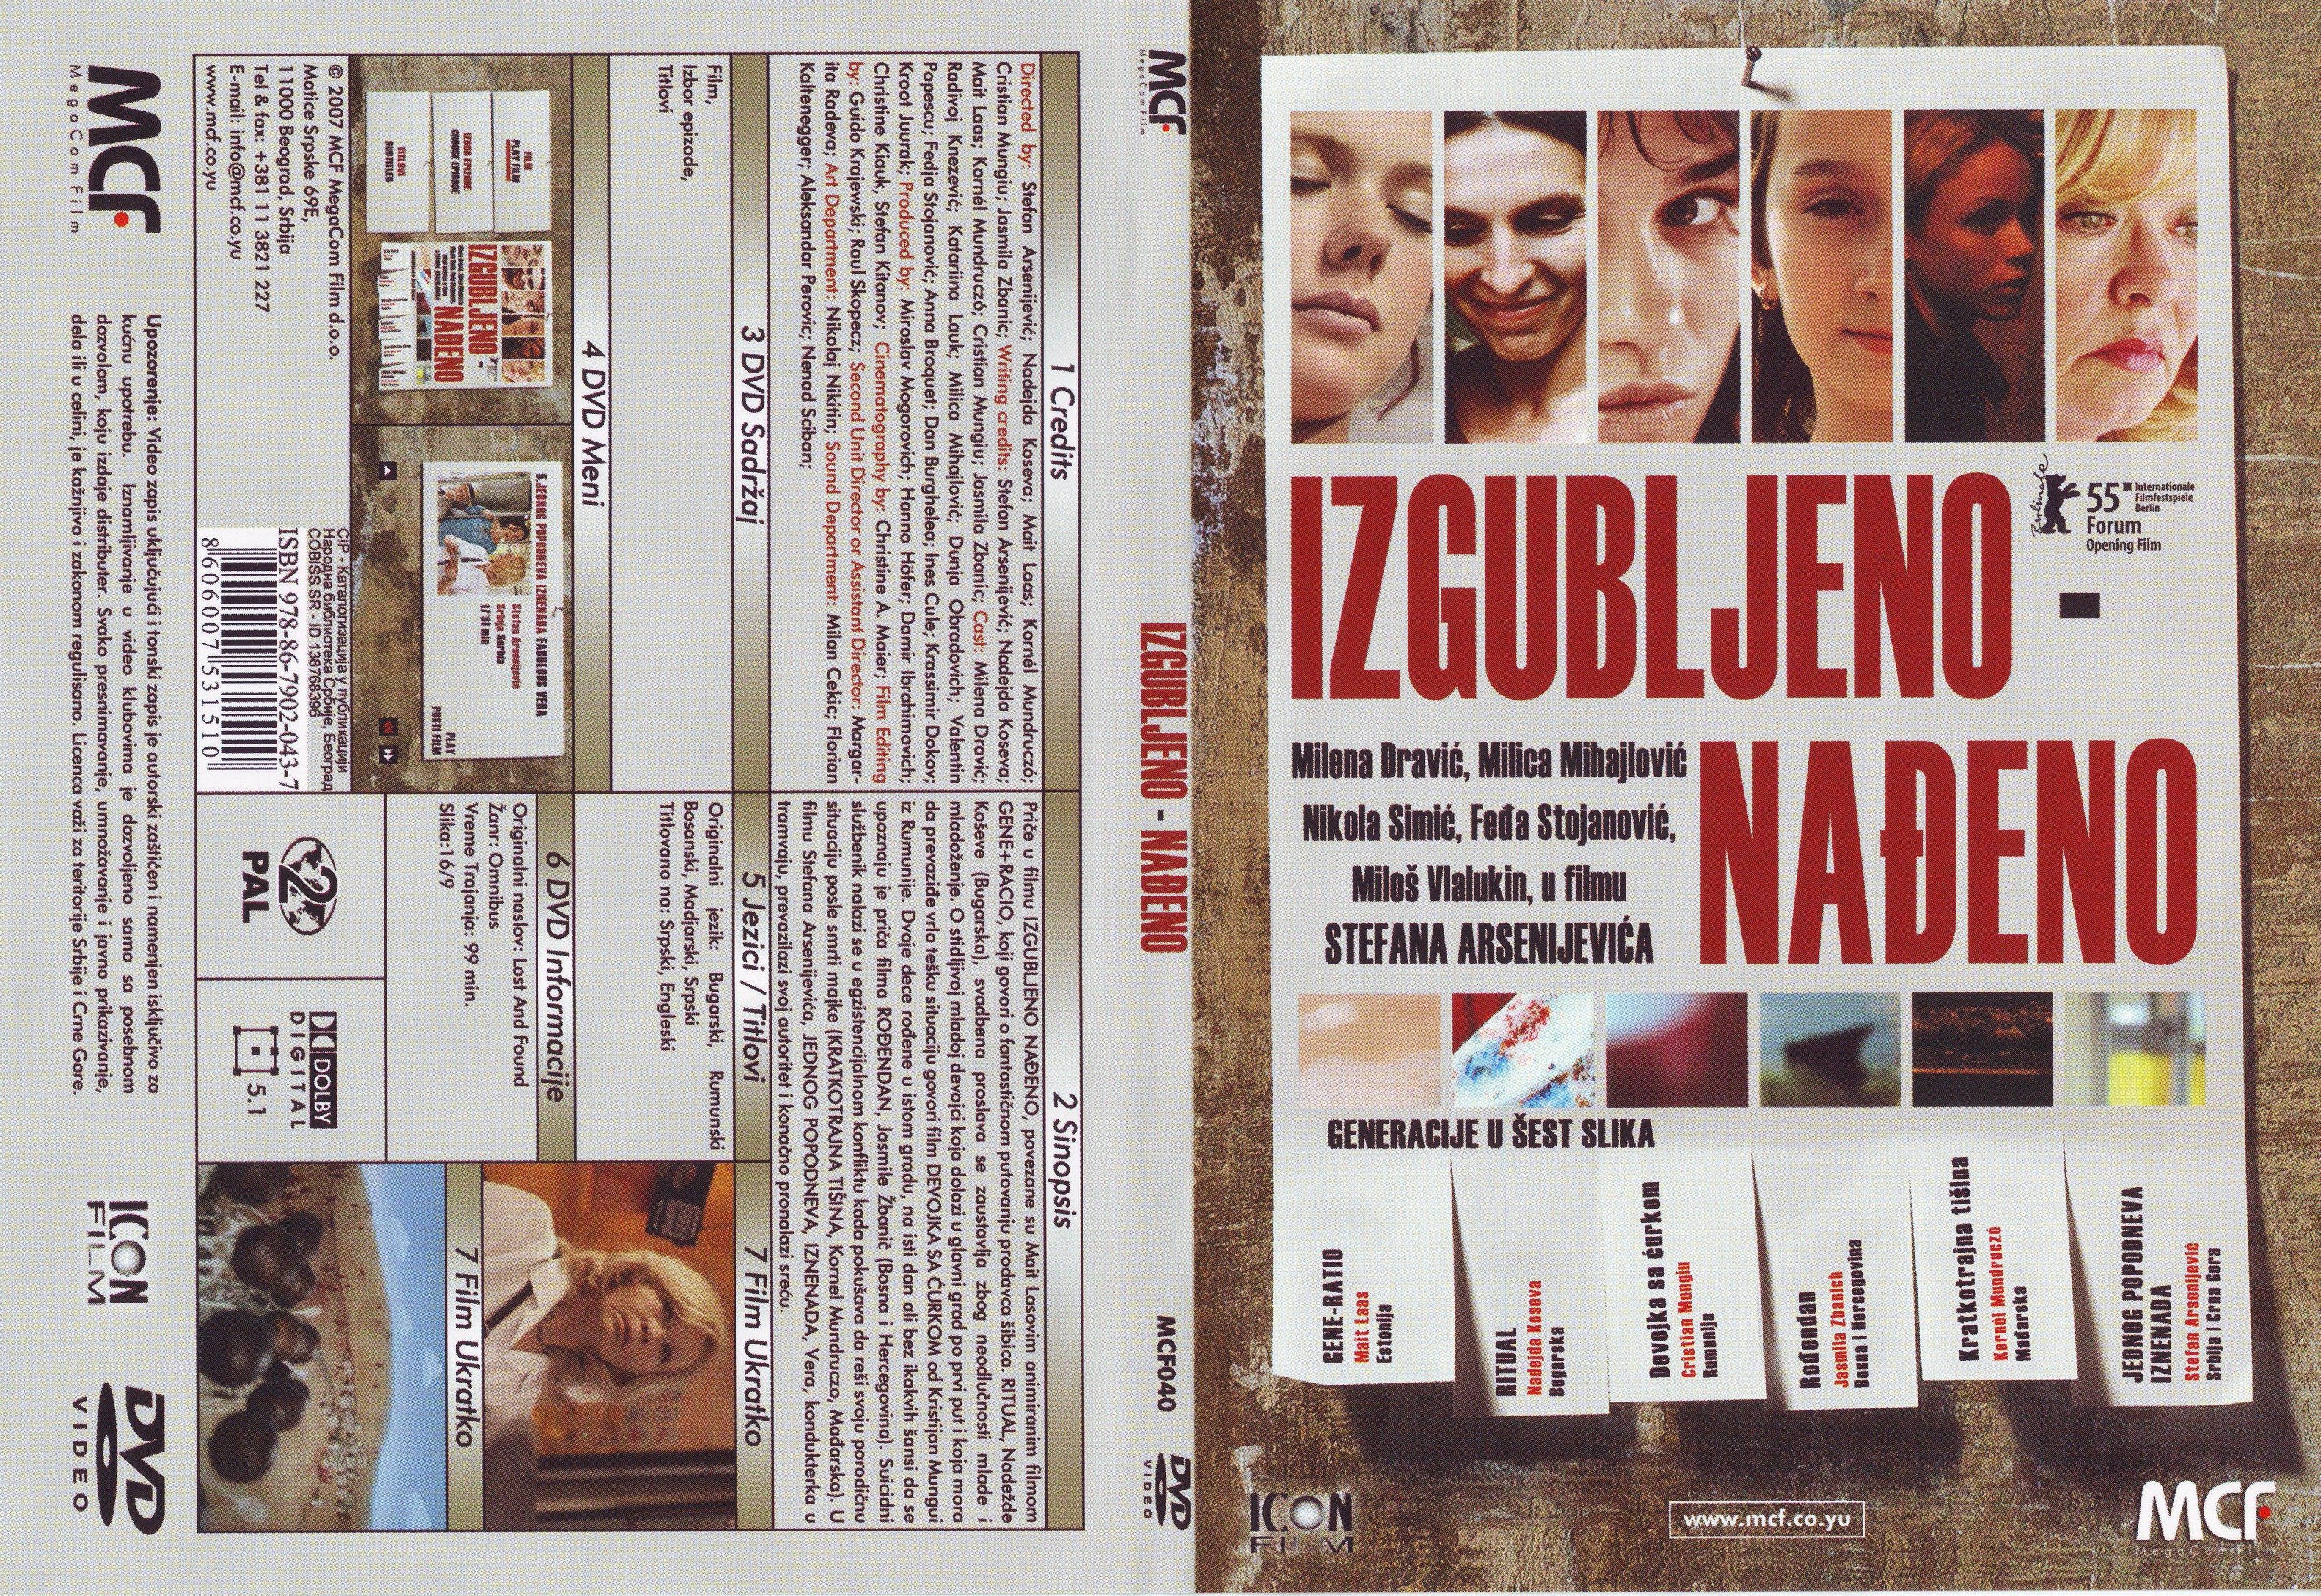 Click to view full size image -  DVD Cover - I - DVD - IZGUBLJENO NADJENO - DVD - IZGUBLJENO NADJENO.jpg